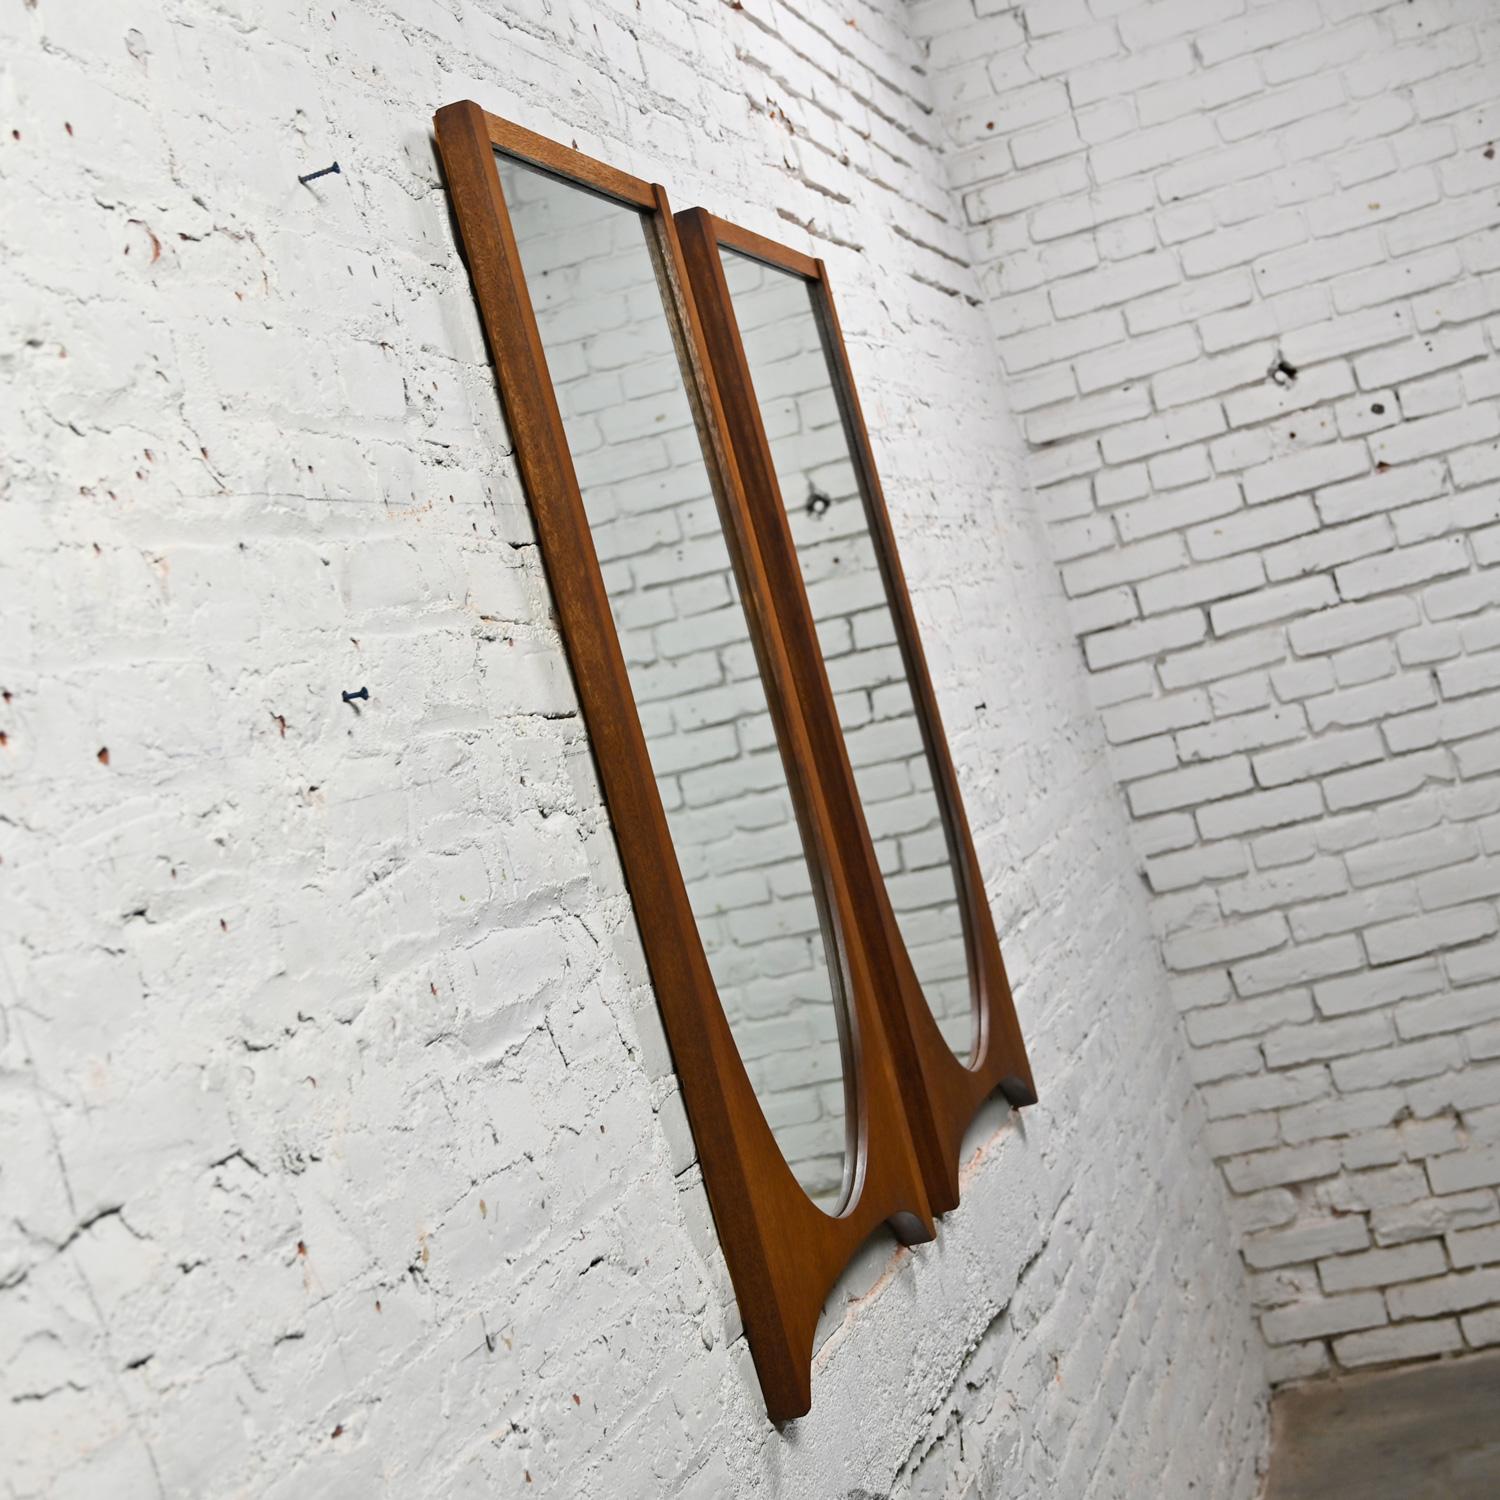 Pair MCM Brutalist Brasilia Single Arch Mirrors 6130-01 Broyhill Premier Series In Good Condition For Sale In Topeka, KS